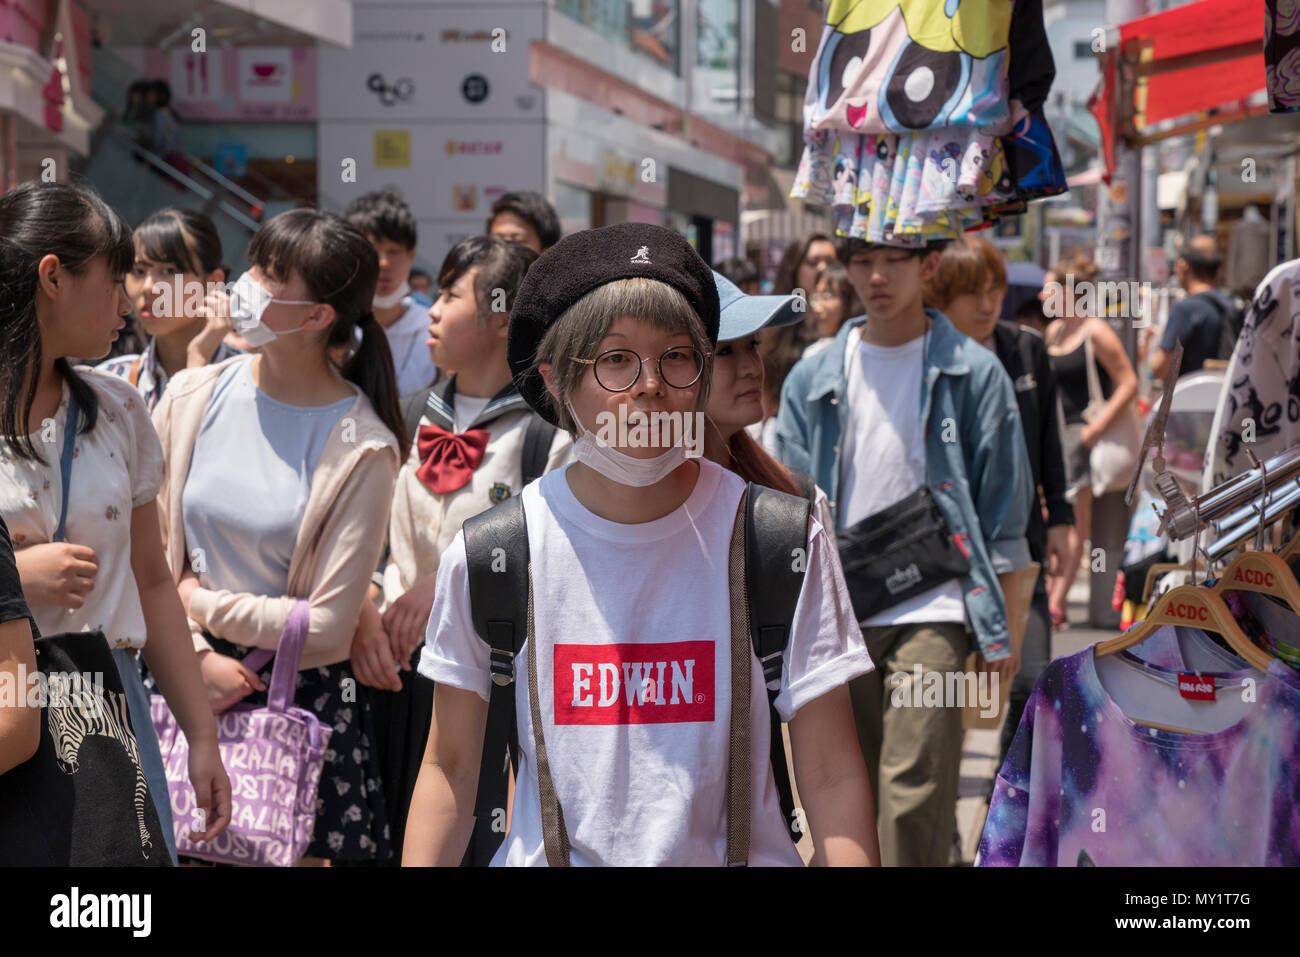 Crowds of people in Takeshita Street, a pedestrian shopping street lined with fashion boutiques, cafes and restaurants in Harajuku in Tokyo, Japan Stock Photo